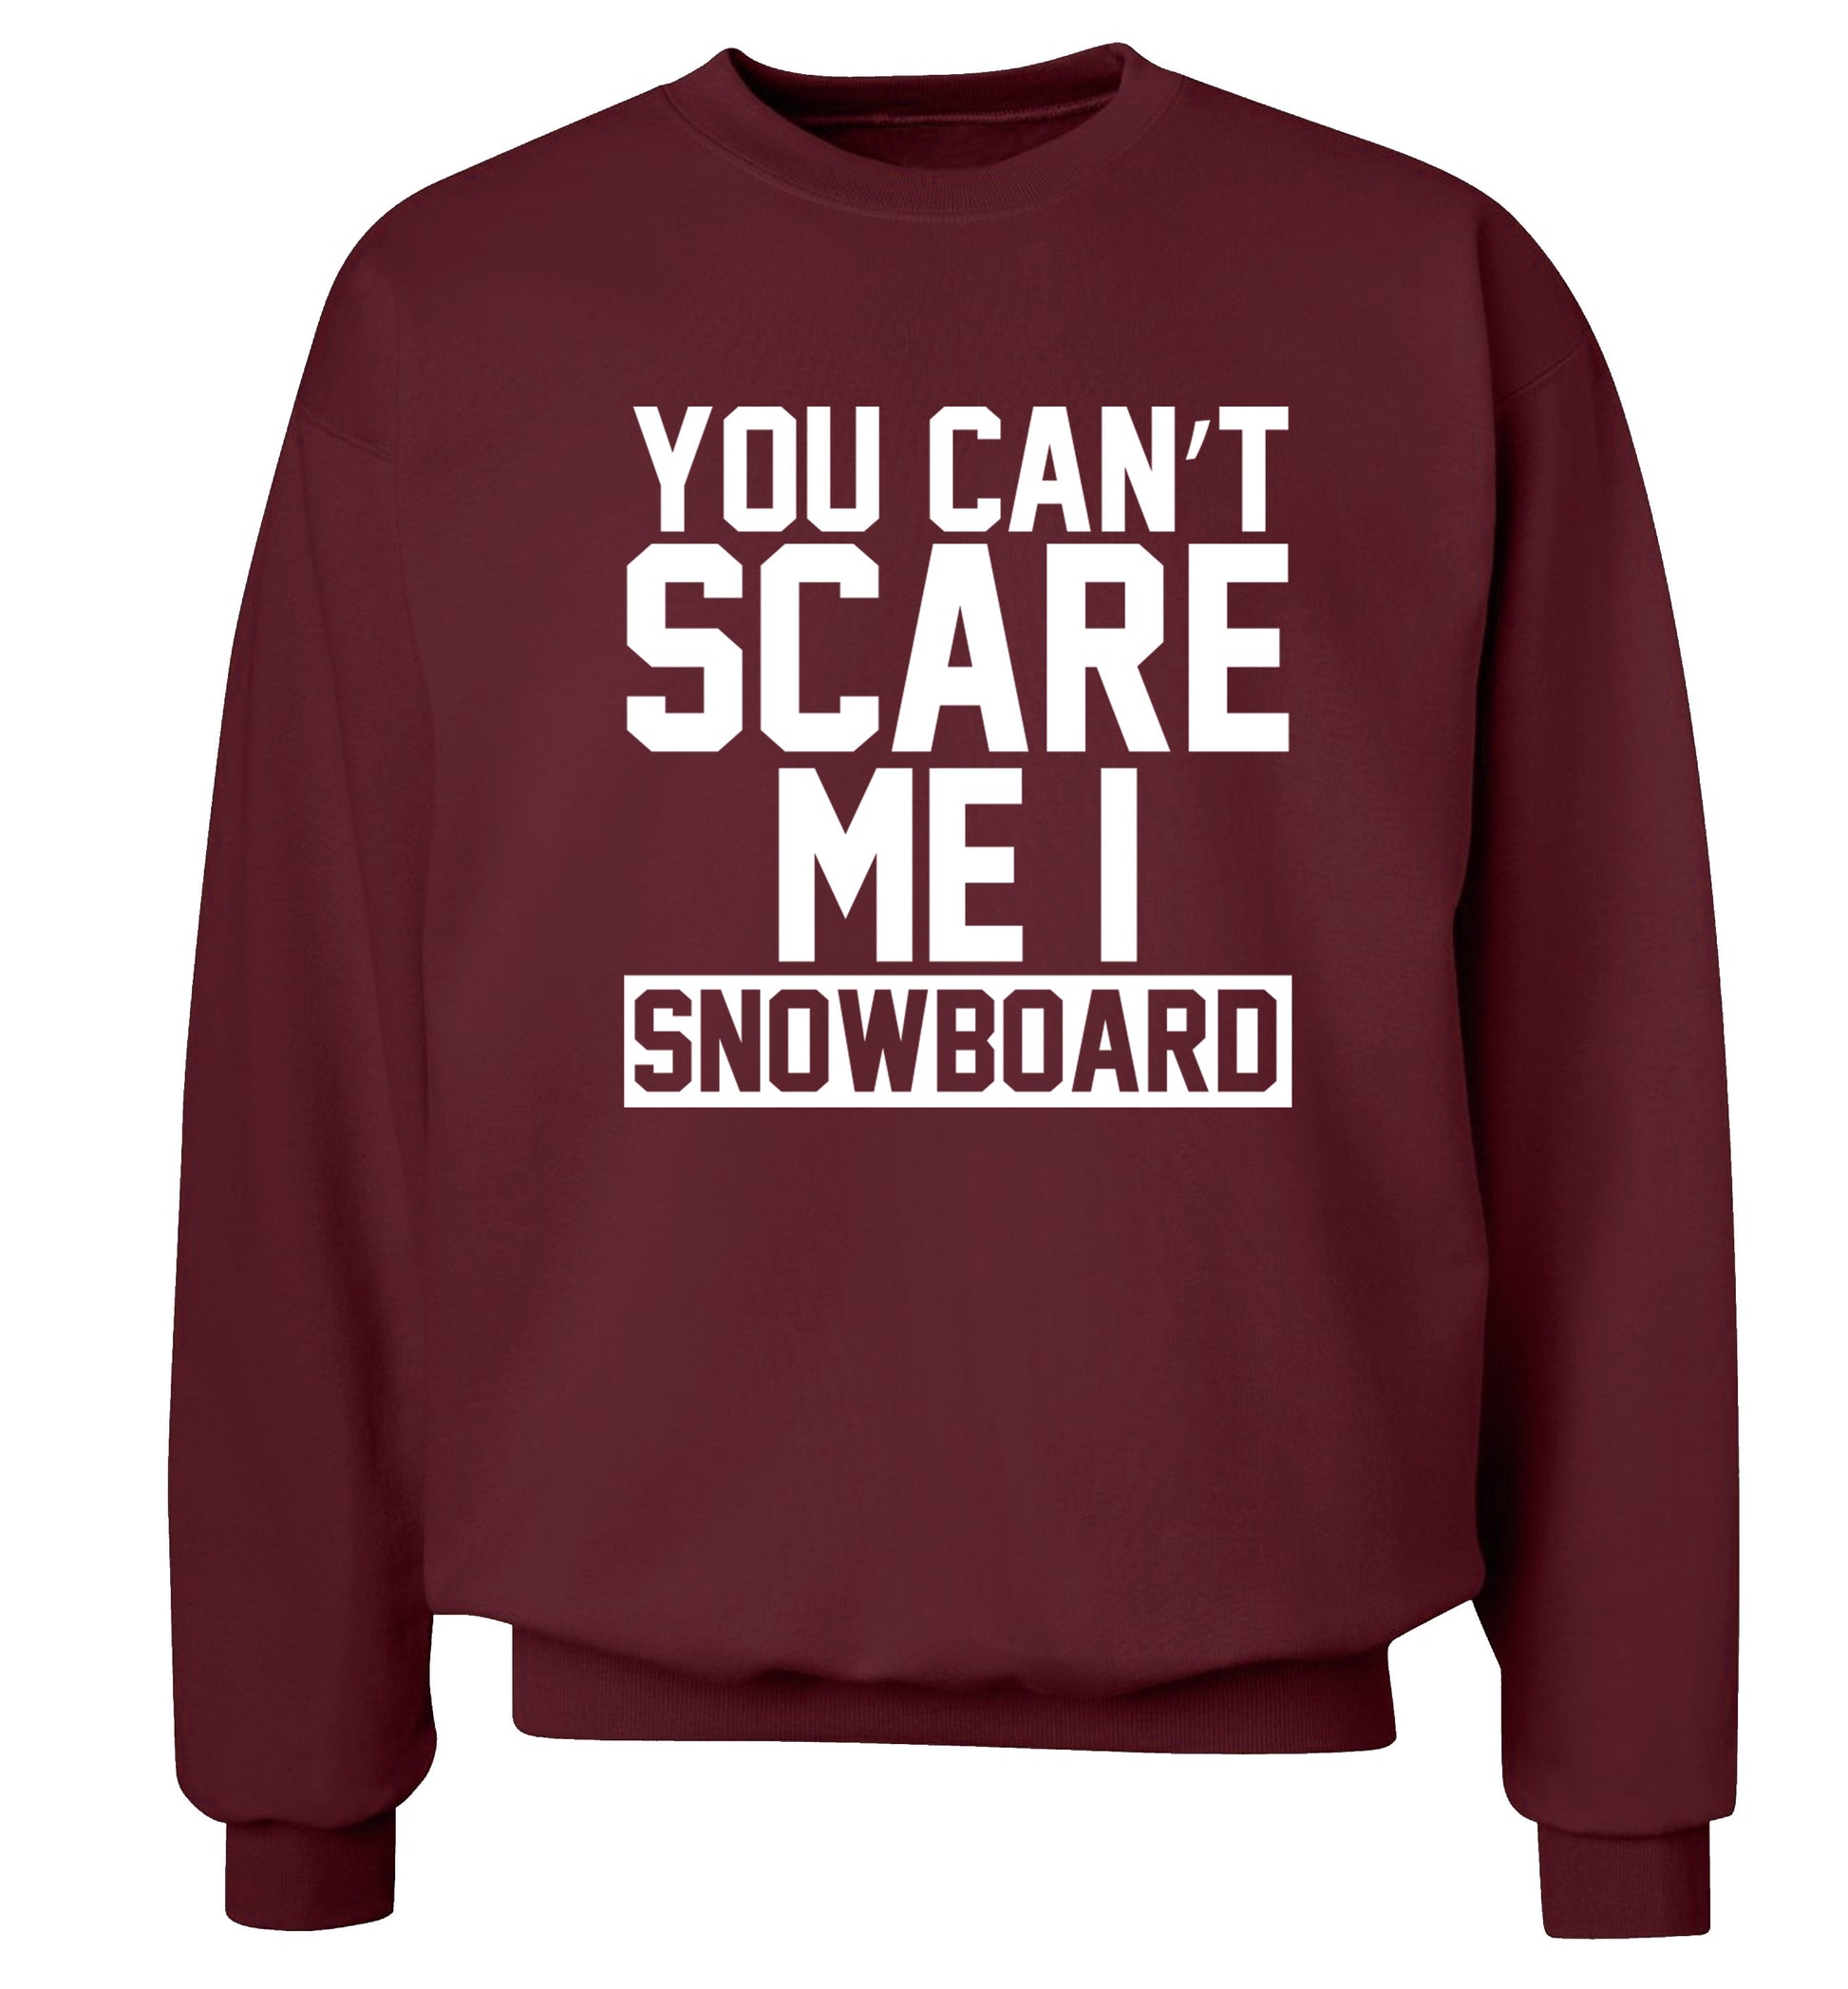 You can't scare me I snowboard Adult's unisex maroon Sweater 2XL